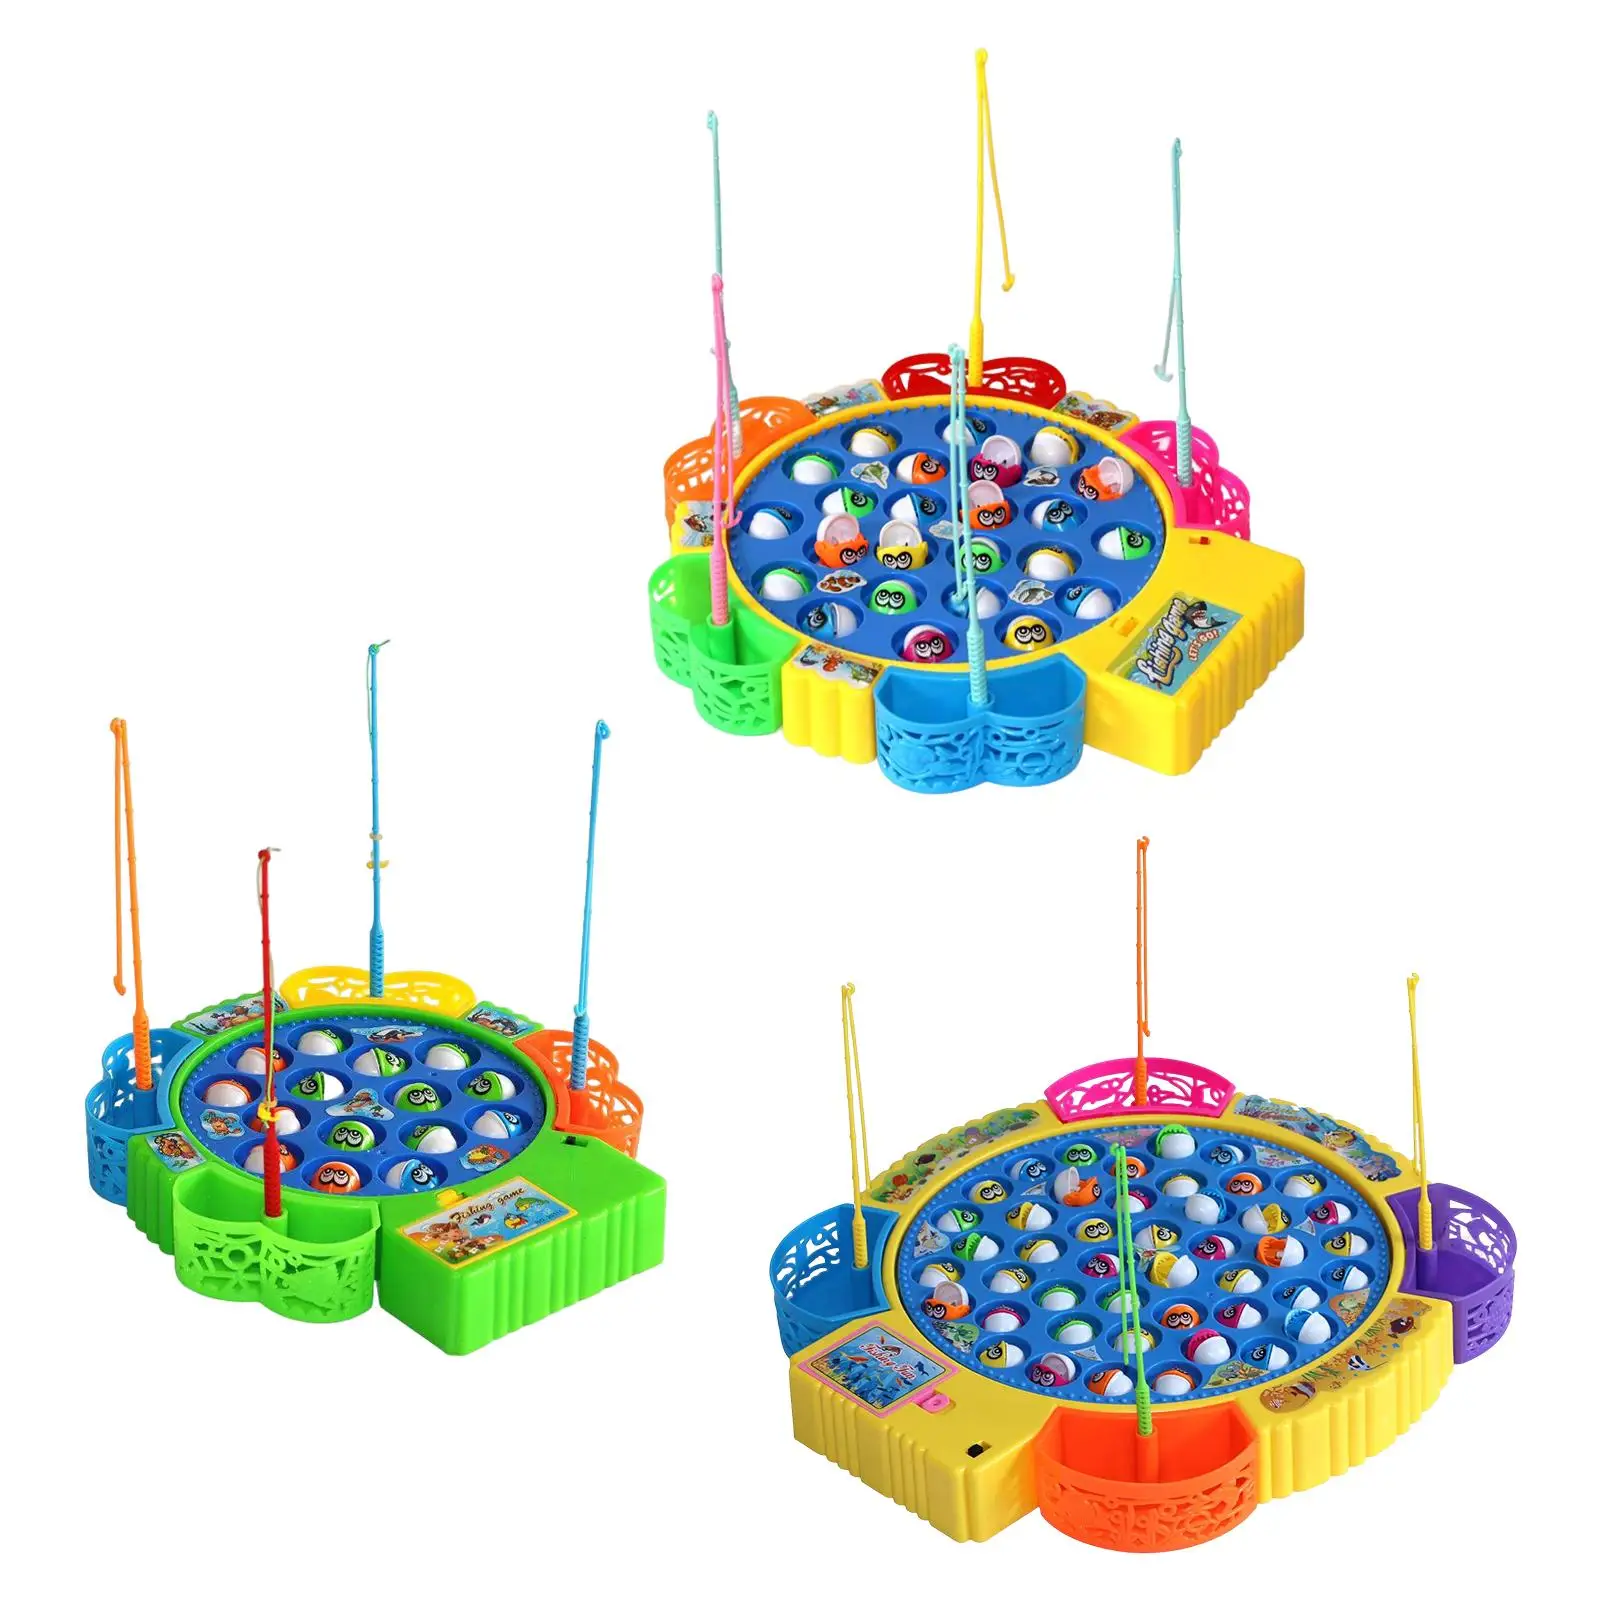 Rotating Fishing Game Kids Toy for Kids Children Early Learning Toy Ages 3+